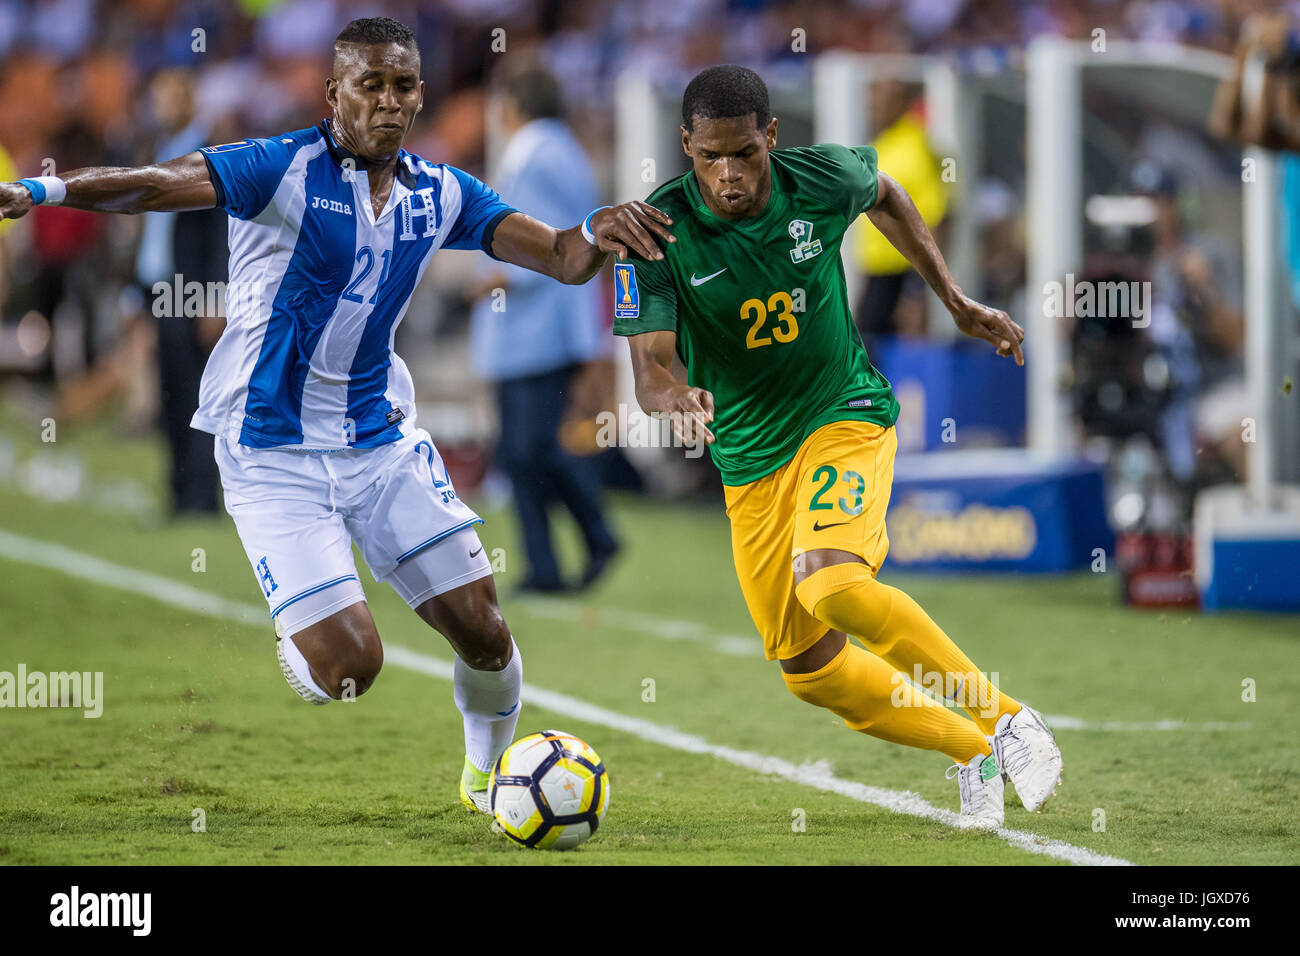 Houston, Texas, USA. 11th July, 2017. Honduras defender Brayan Beckeles (21) and French Guiana midfielder Ludovic Baal (23) battle for the ball during the 1st half of an international CONCACAF Gold Cup soccer match between Honduras and French Guiana at BBVA Compass Stadium in Houston, TX on July 11th, 2017. The game ended in a 0-0 draw. Credit: Trask Smith/ZUMA Wire/Alamy Live News Stock Photo